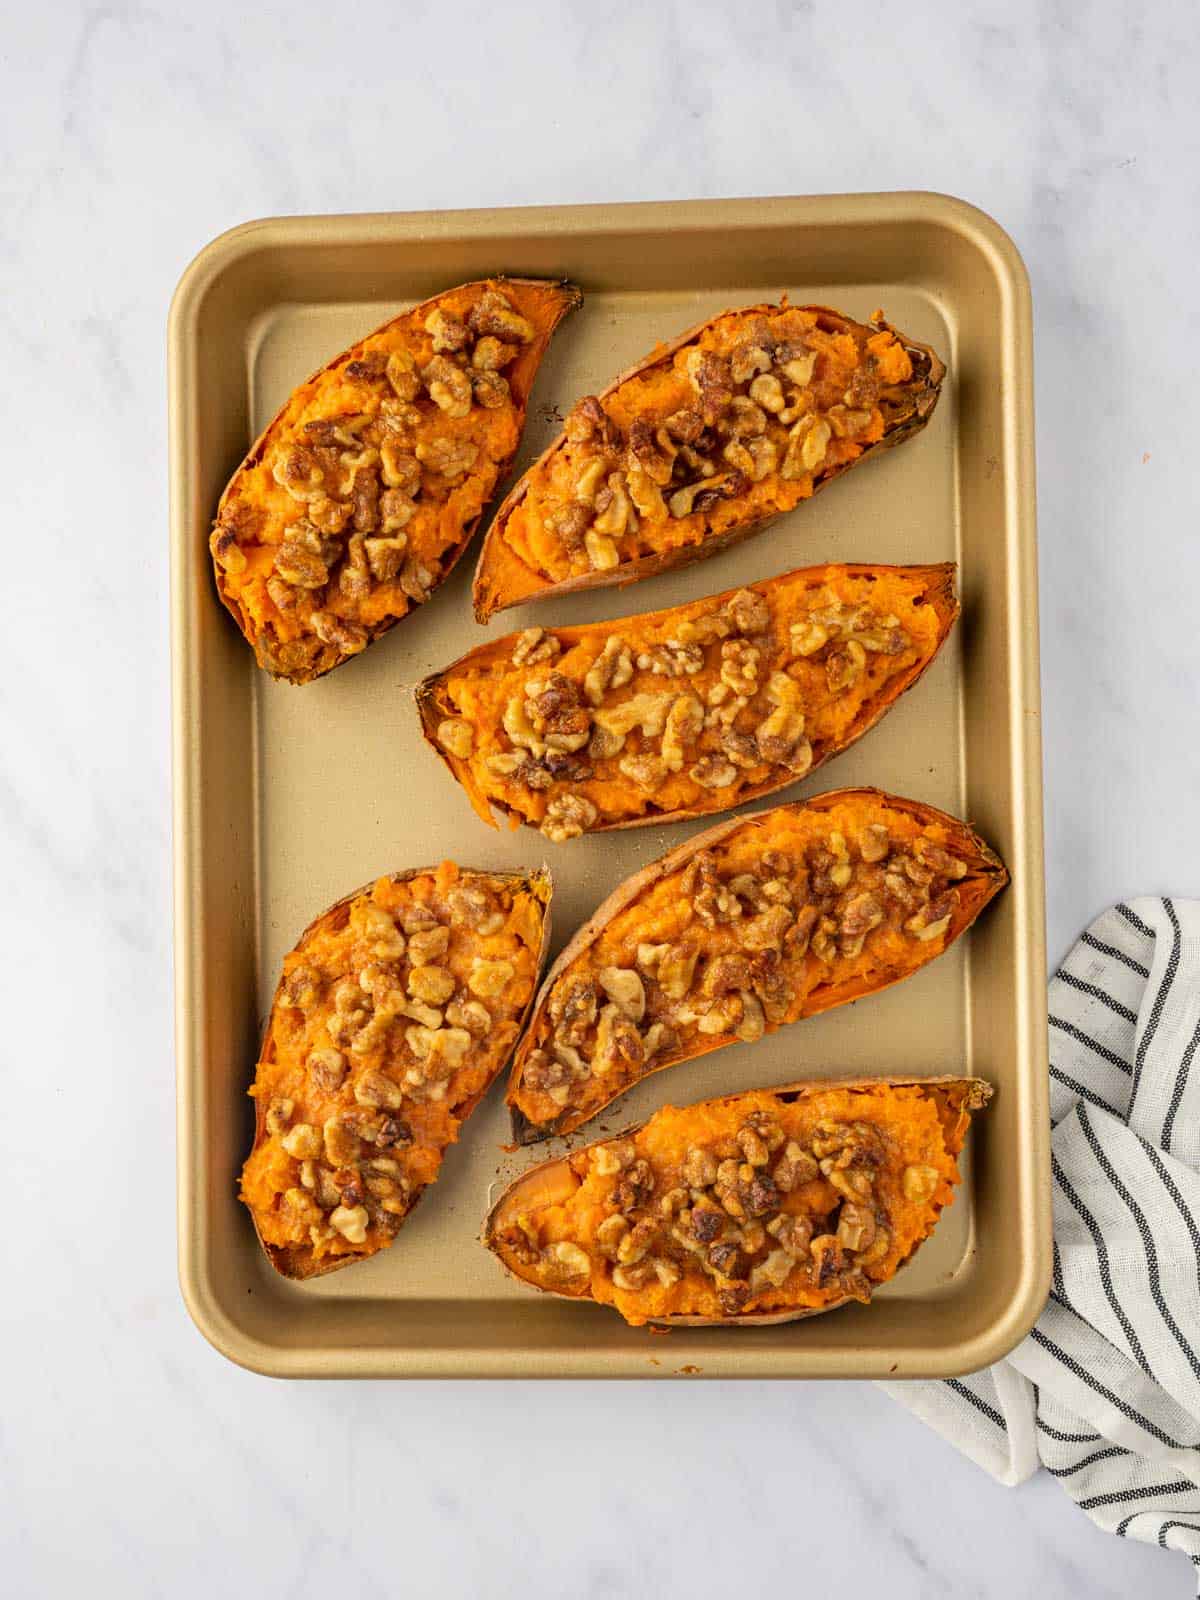 A tray of double baked sweet potatoes.